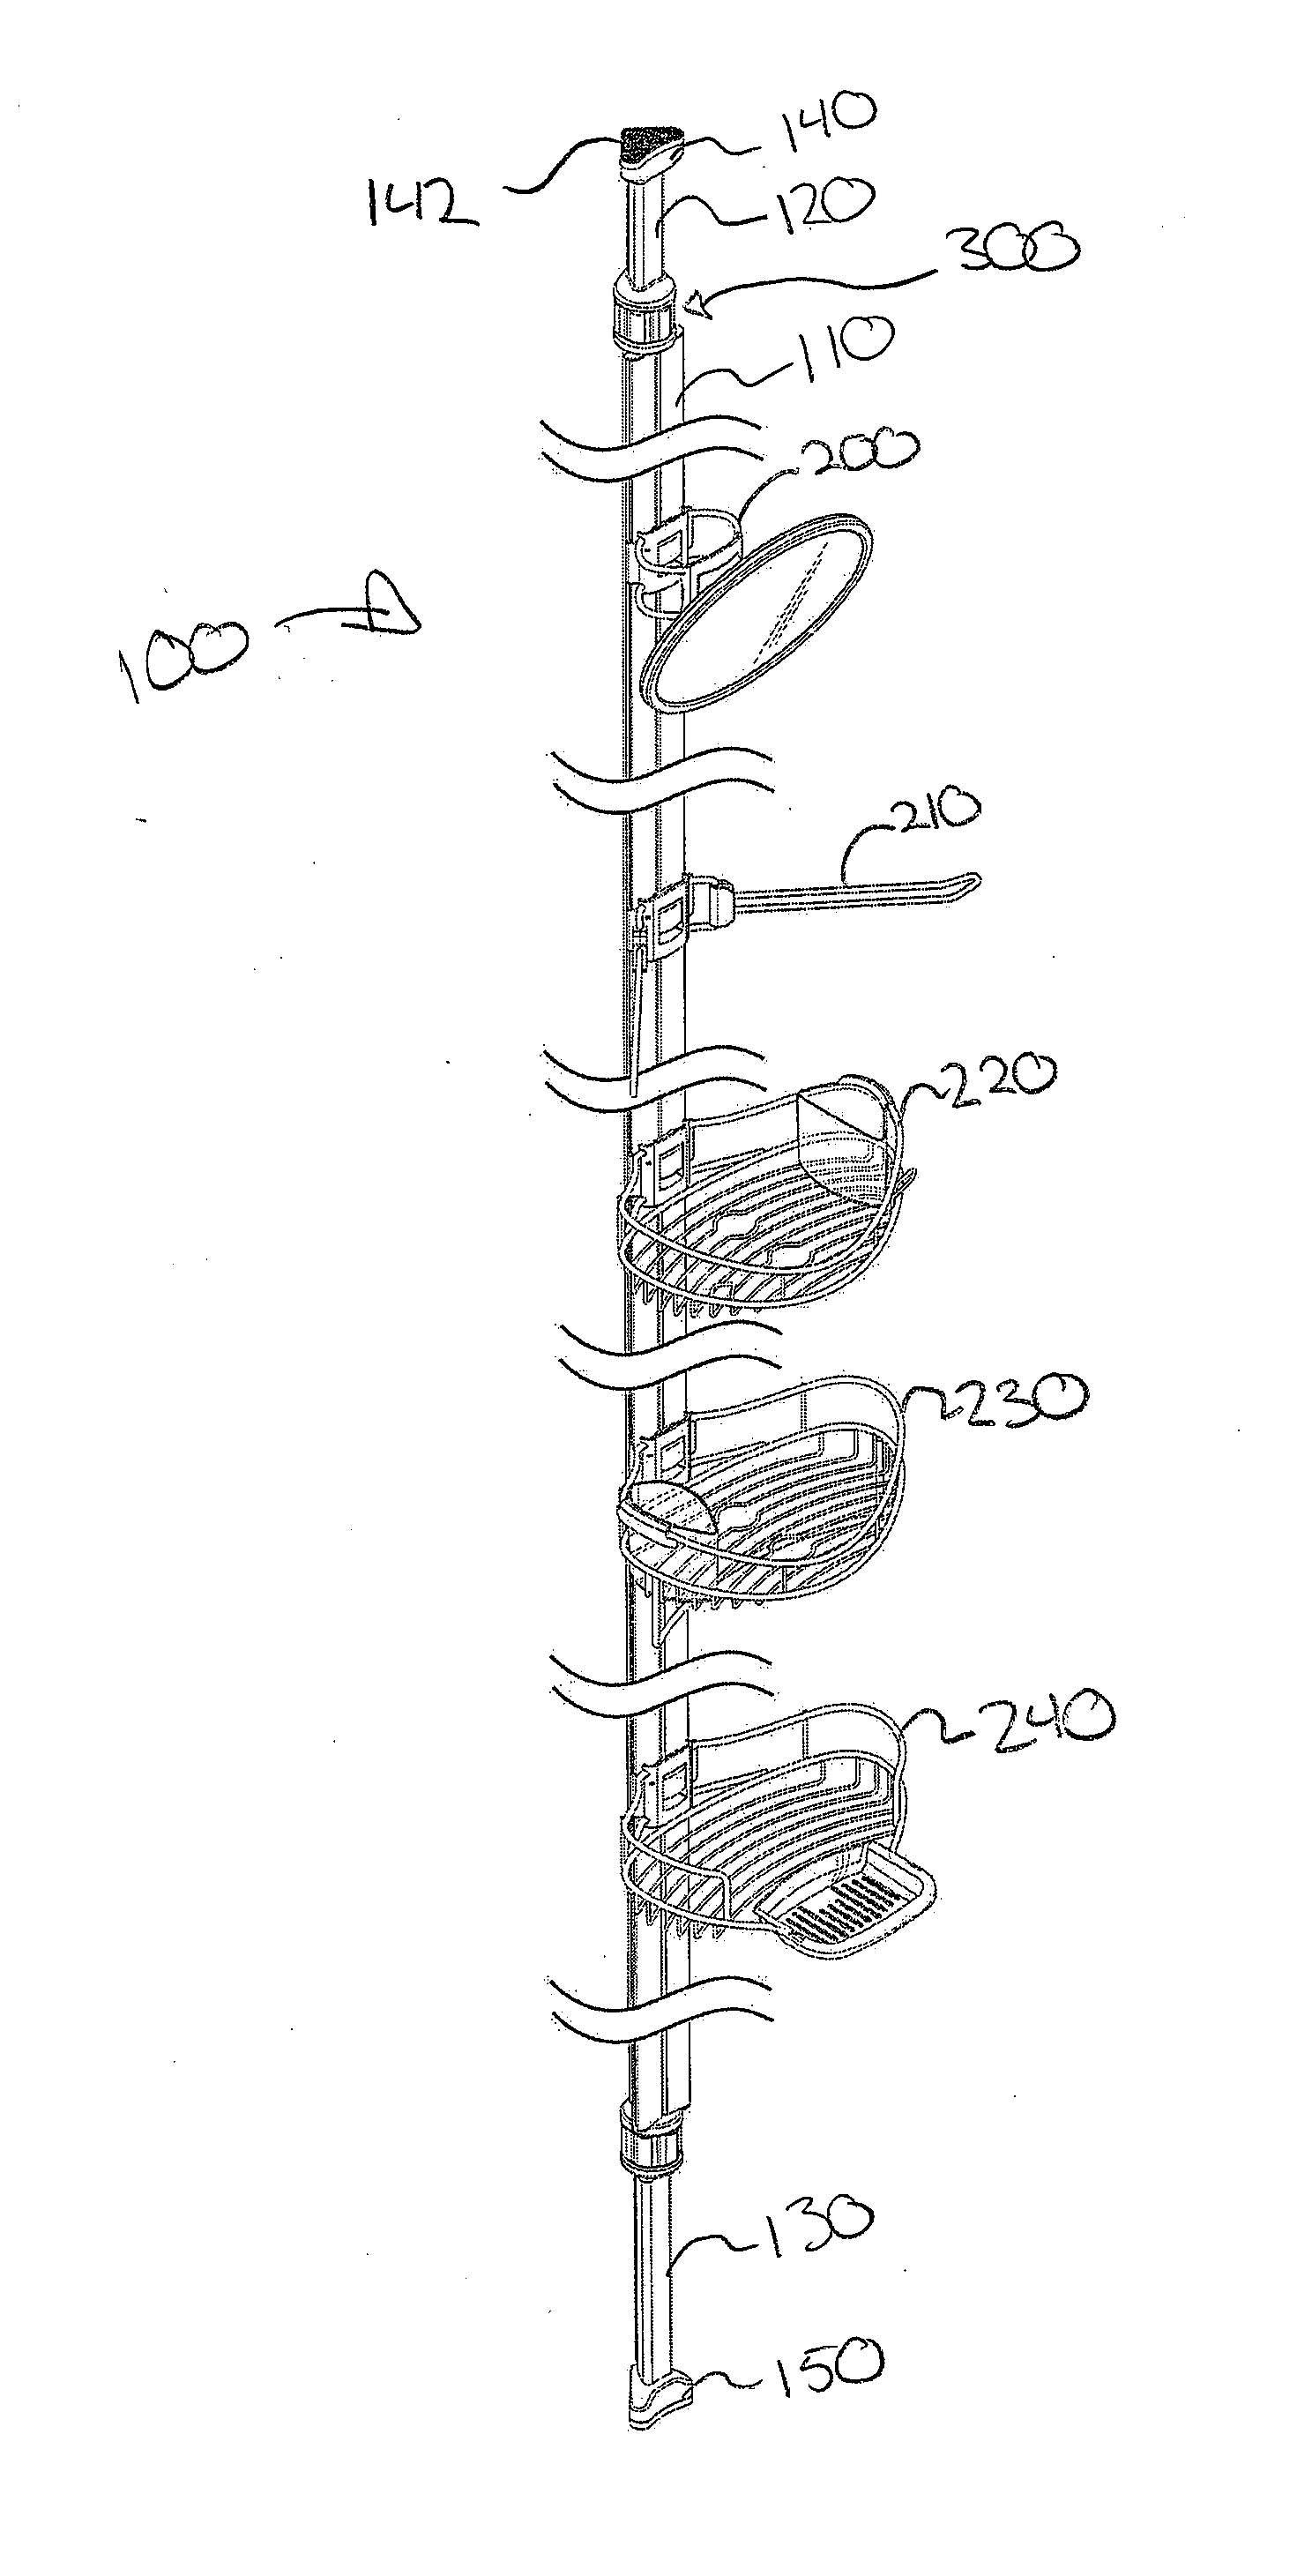 Vertically Adjustable Shower Caddy and Method for Tensioning Same